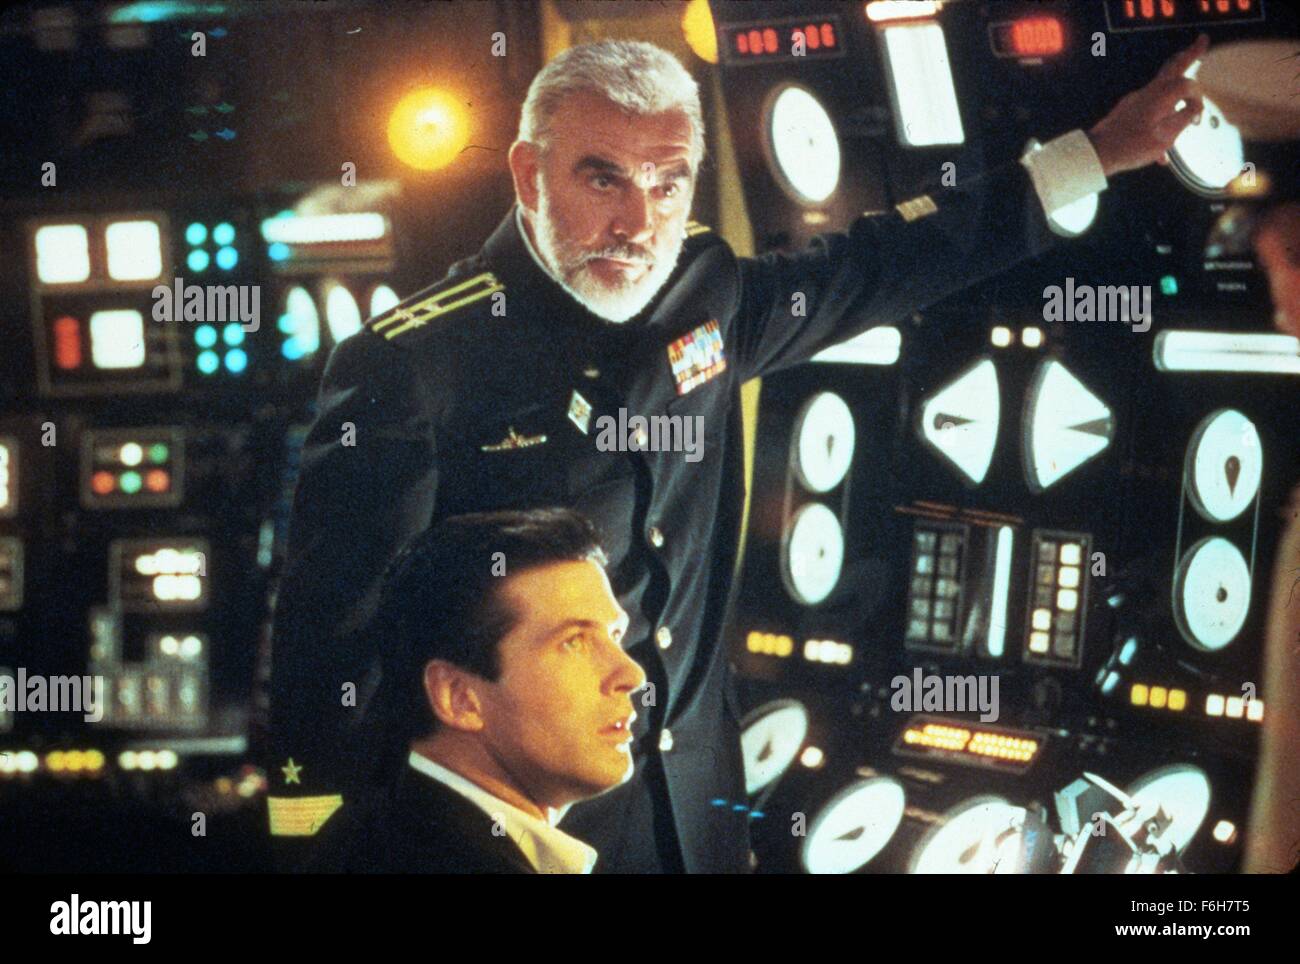 RELEASE DATE: March 2, 1990   MOVIE TITLE: The Hunt For Red October   STUDIO: Paramount Pictures   DIRECTOR: John McTiernan   PLOT: In 1984, the USSR's best submarine captain in their newest sub violates orders and heads for the USA. Is he trying to defect, or to start a war?   PICTURED: SEAN CONNERY as Marko Ramius and ALEC BALDWIN as Jack Ryan.   (Credit Image: c Paramount Pictures/Entertainment Pictures) Stock Photo